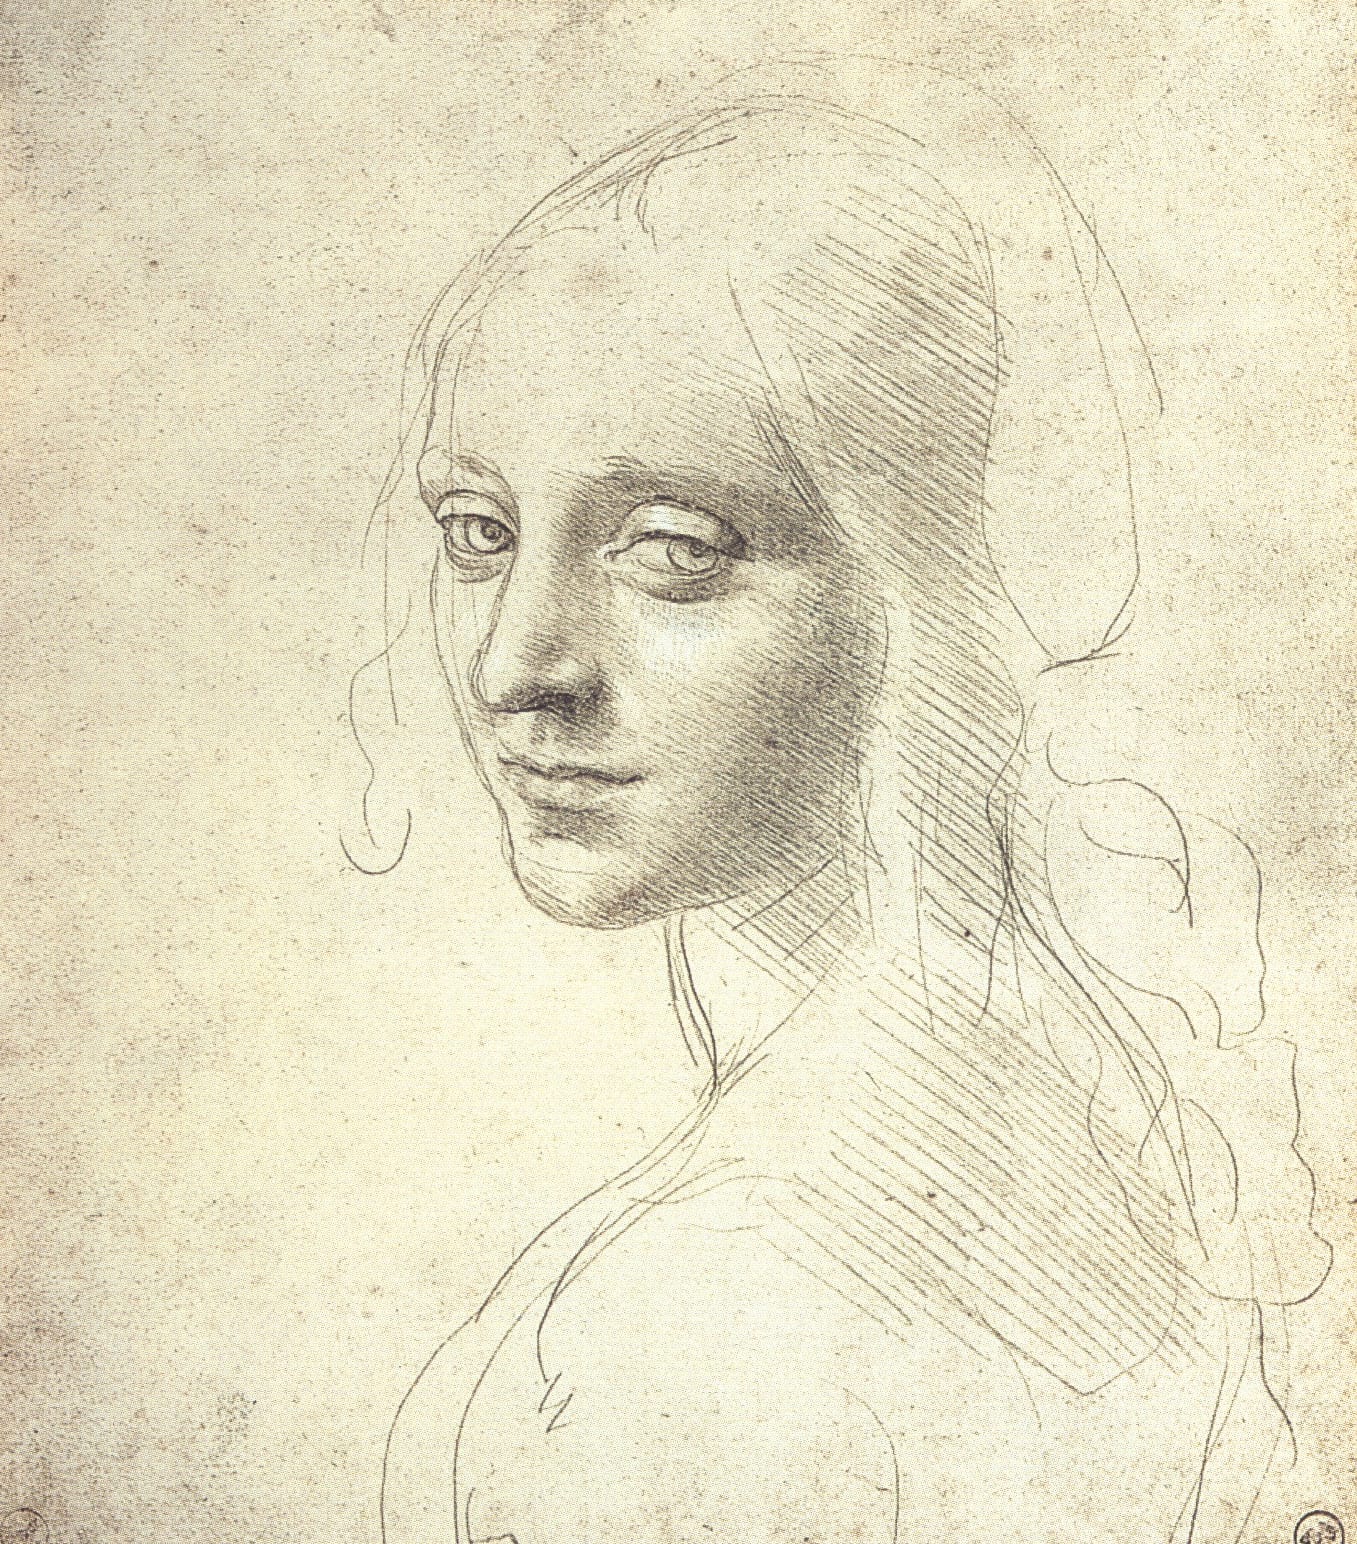 12 Masters of Drawing: From Leonardo da Vinci to Picasso